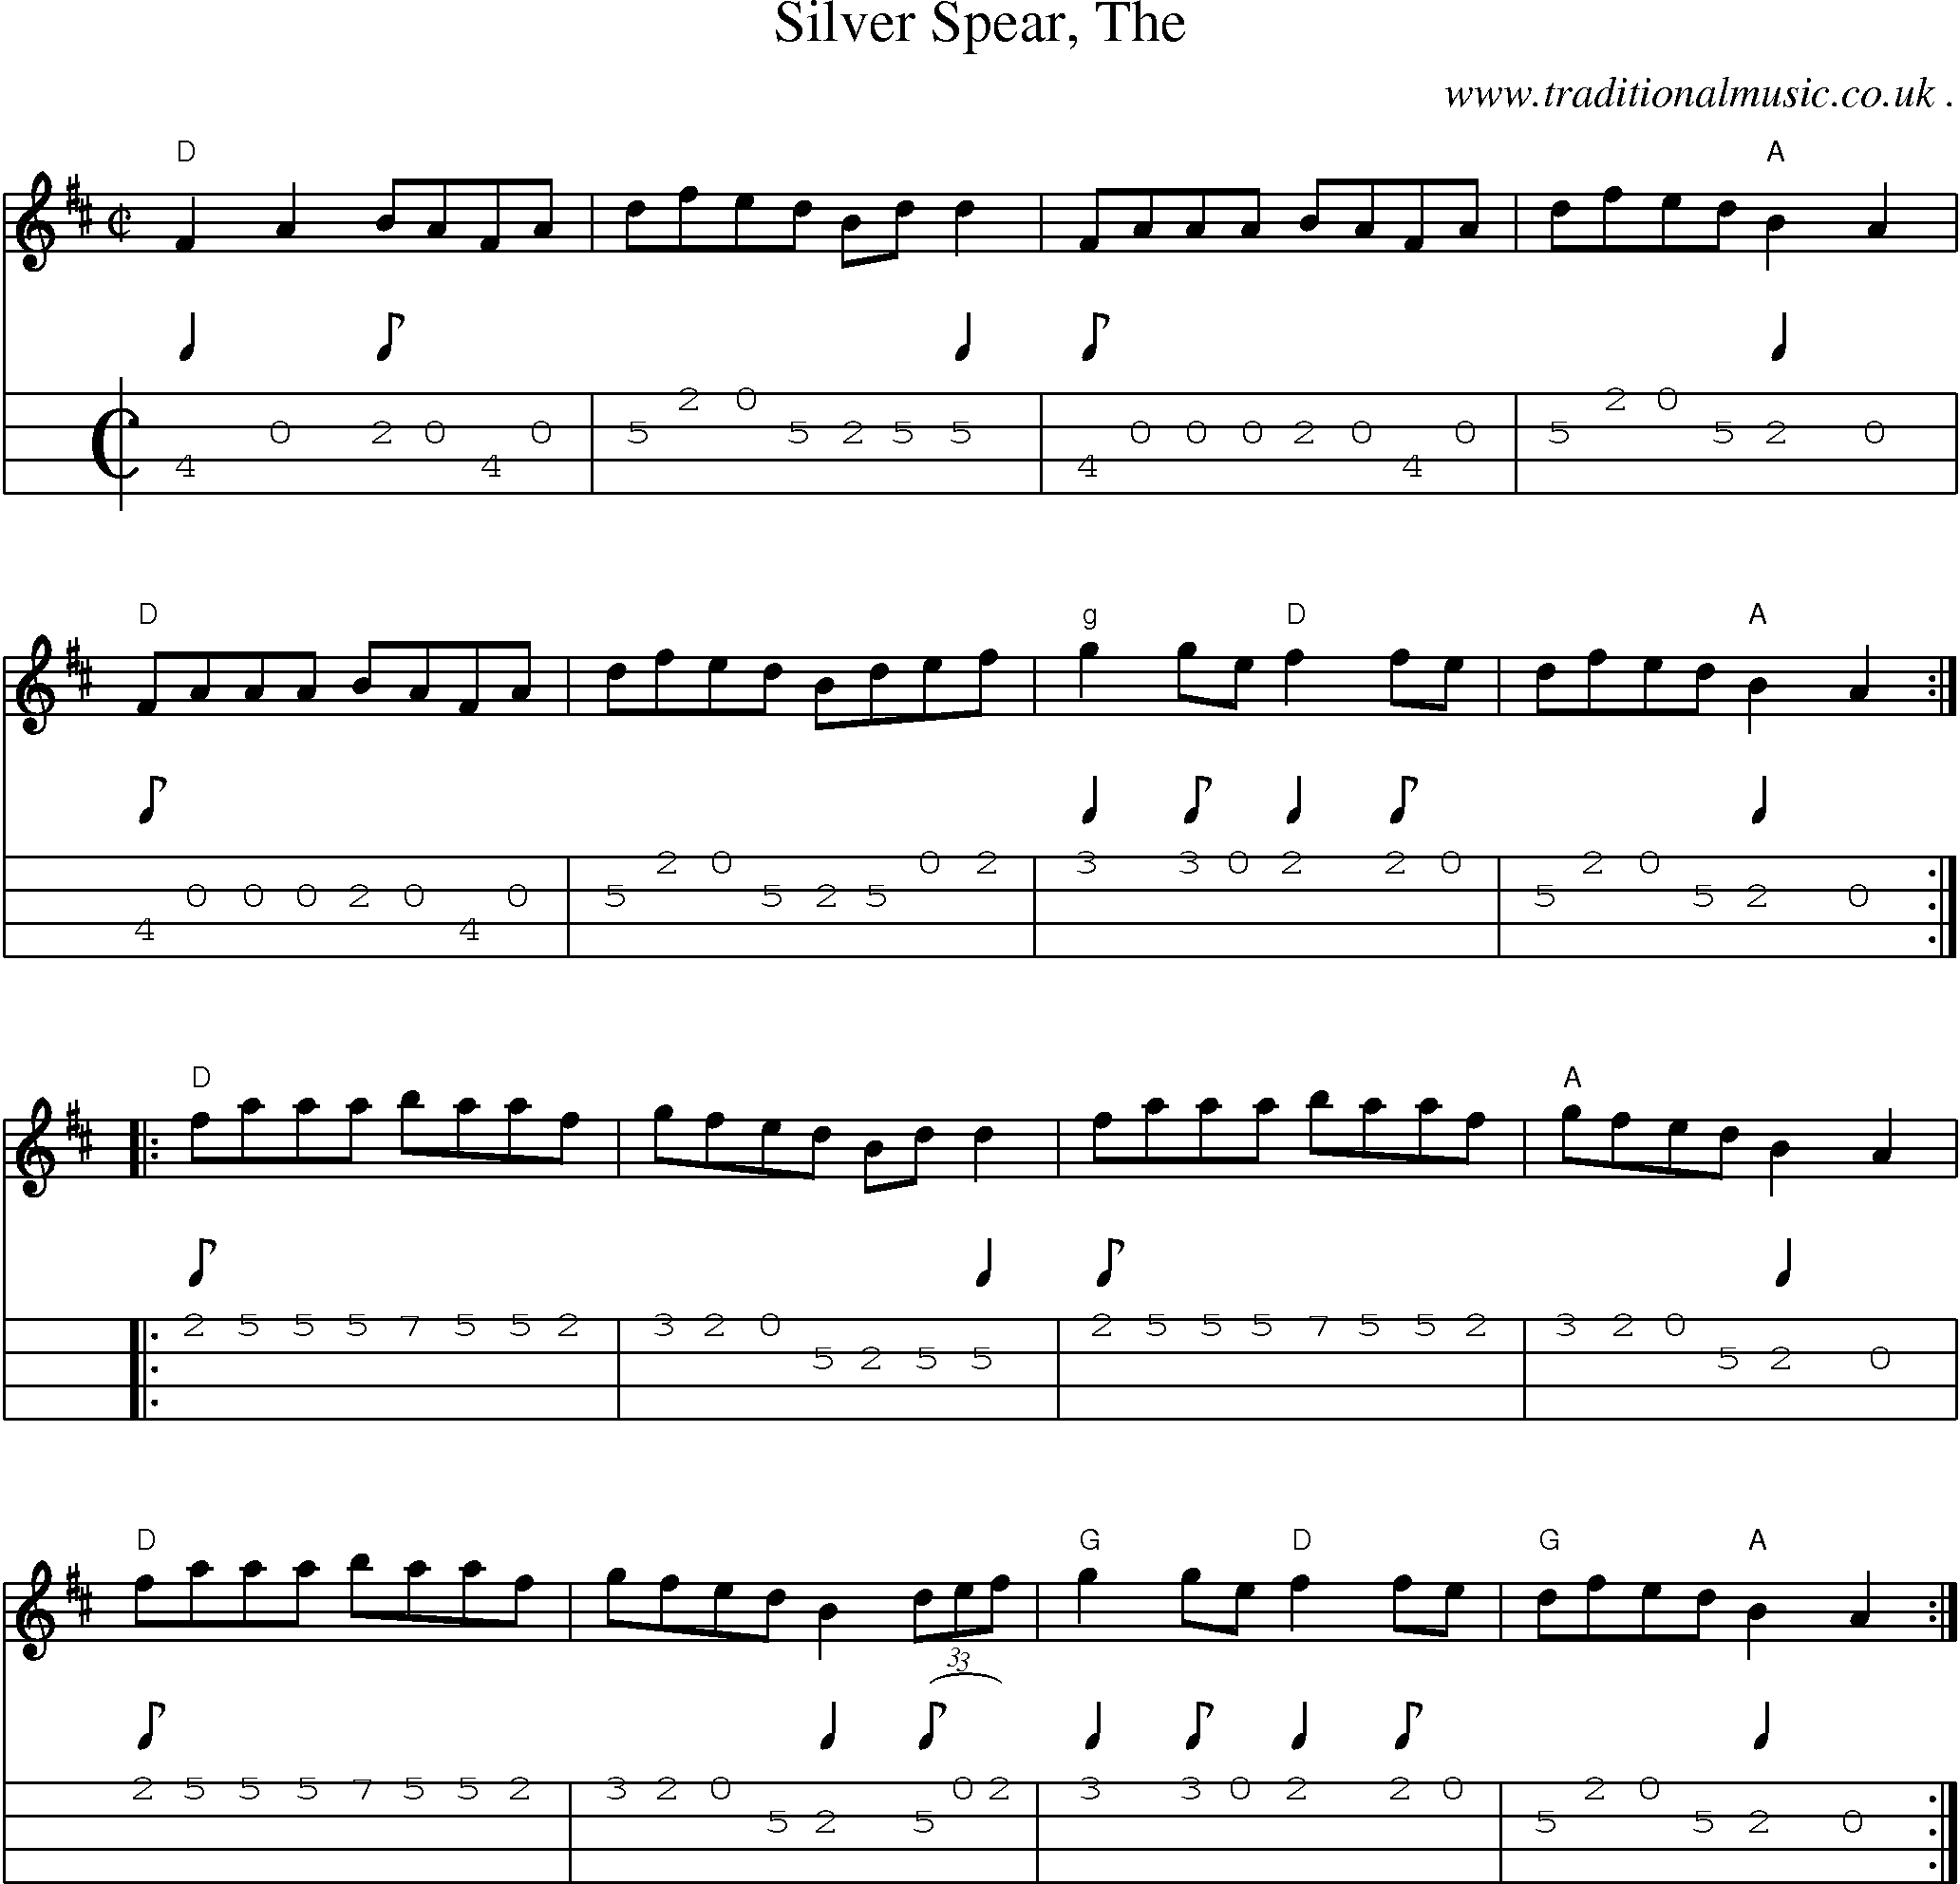 Music Score and Guitar Tabs for Silver Spear The